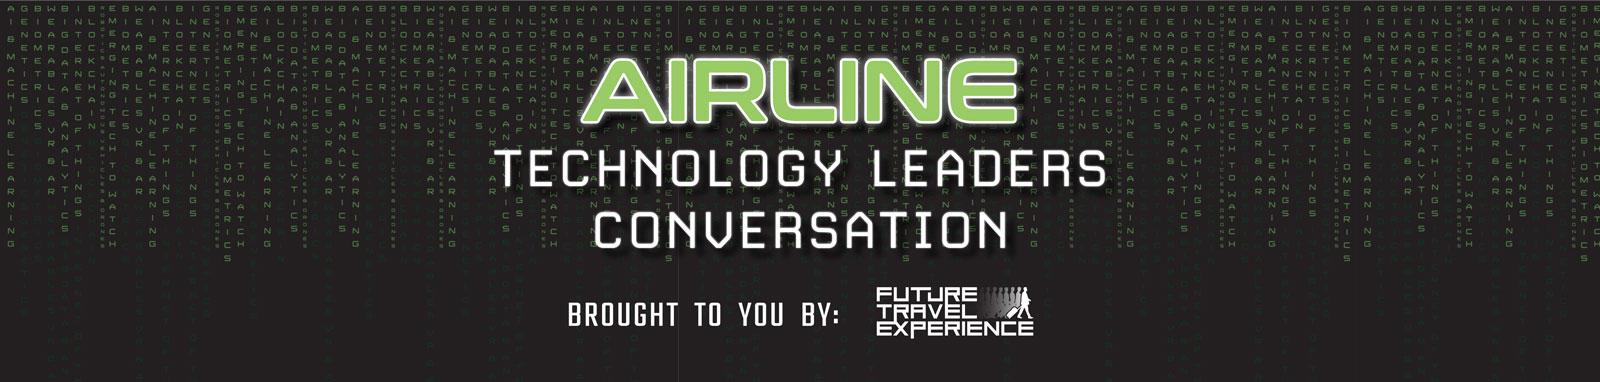 The-Airline-Technology-Leaders-Conversation